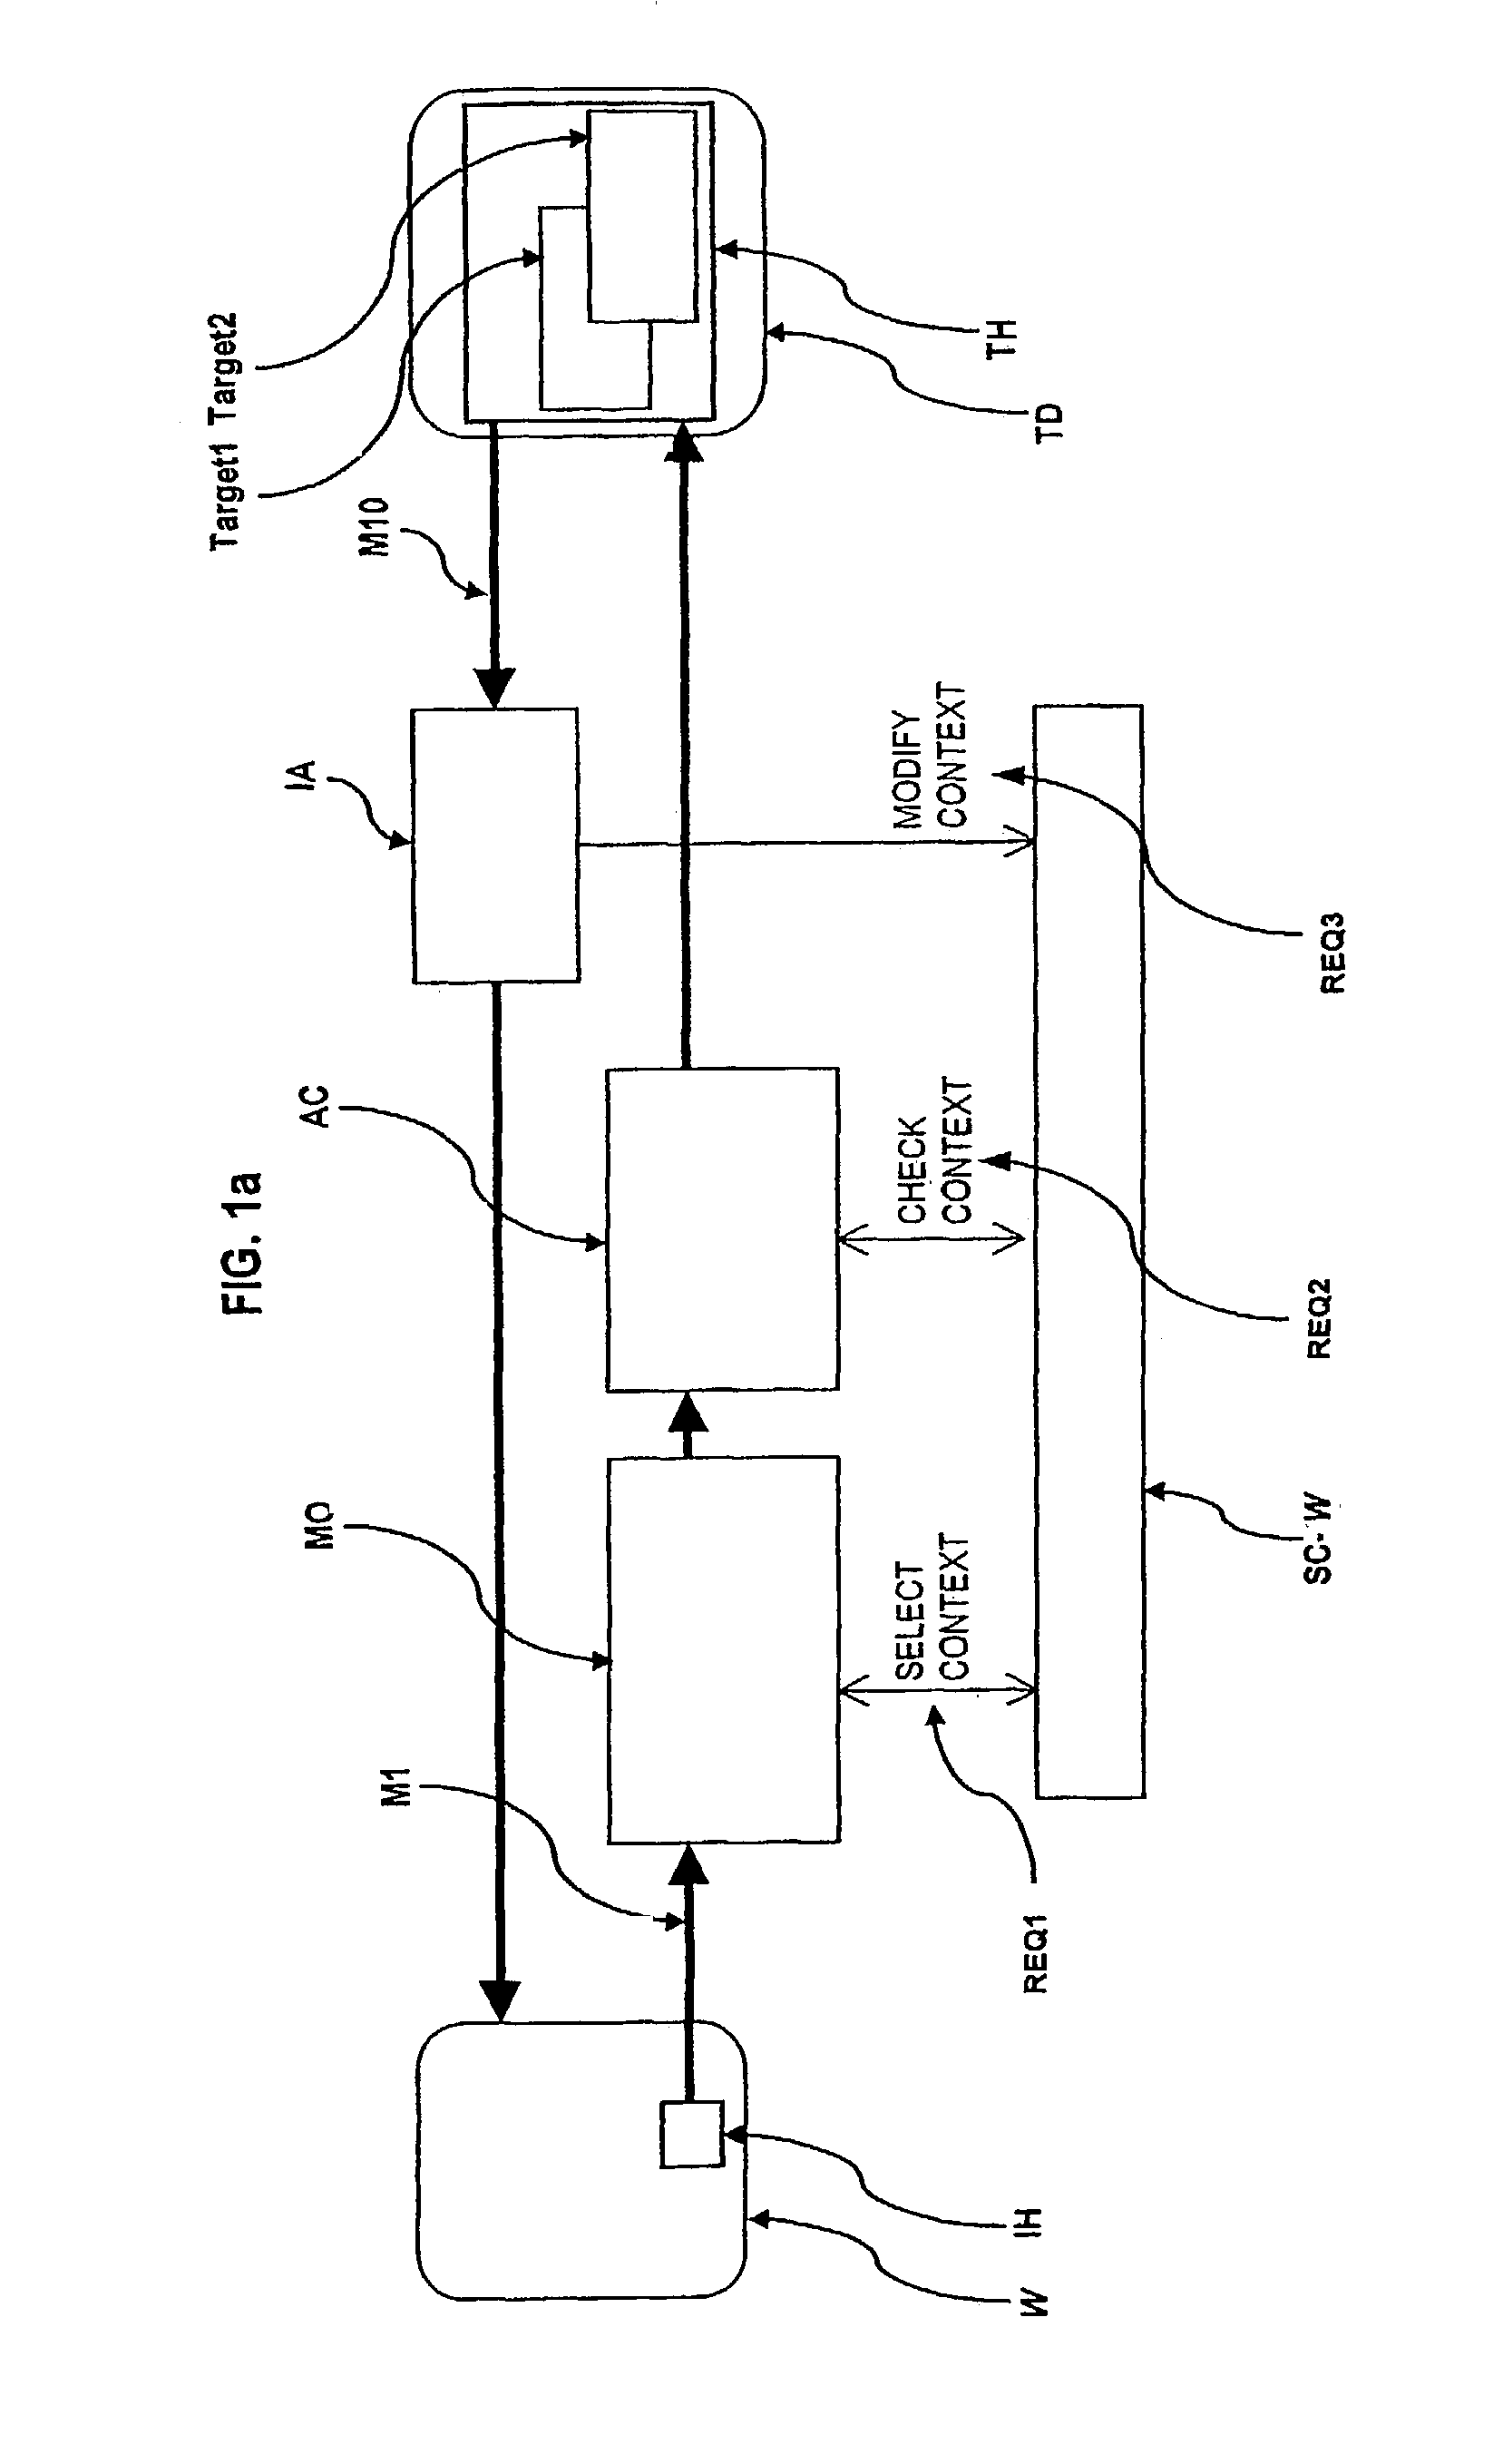 Method and system for session based authorization and access control for networked application objects